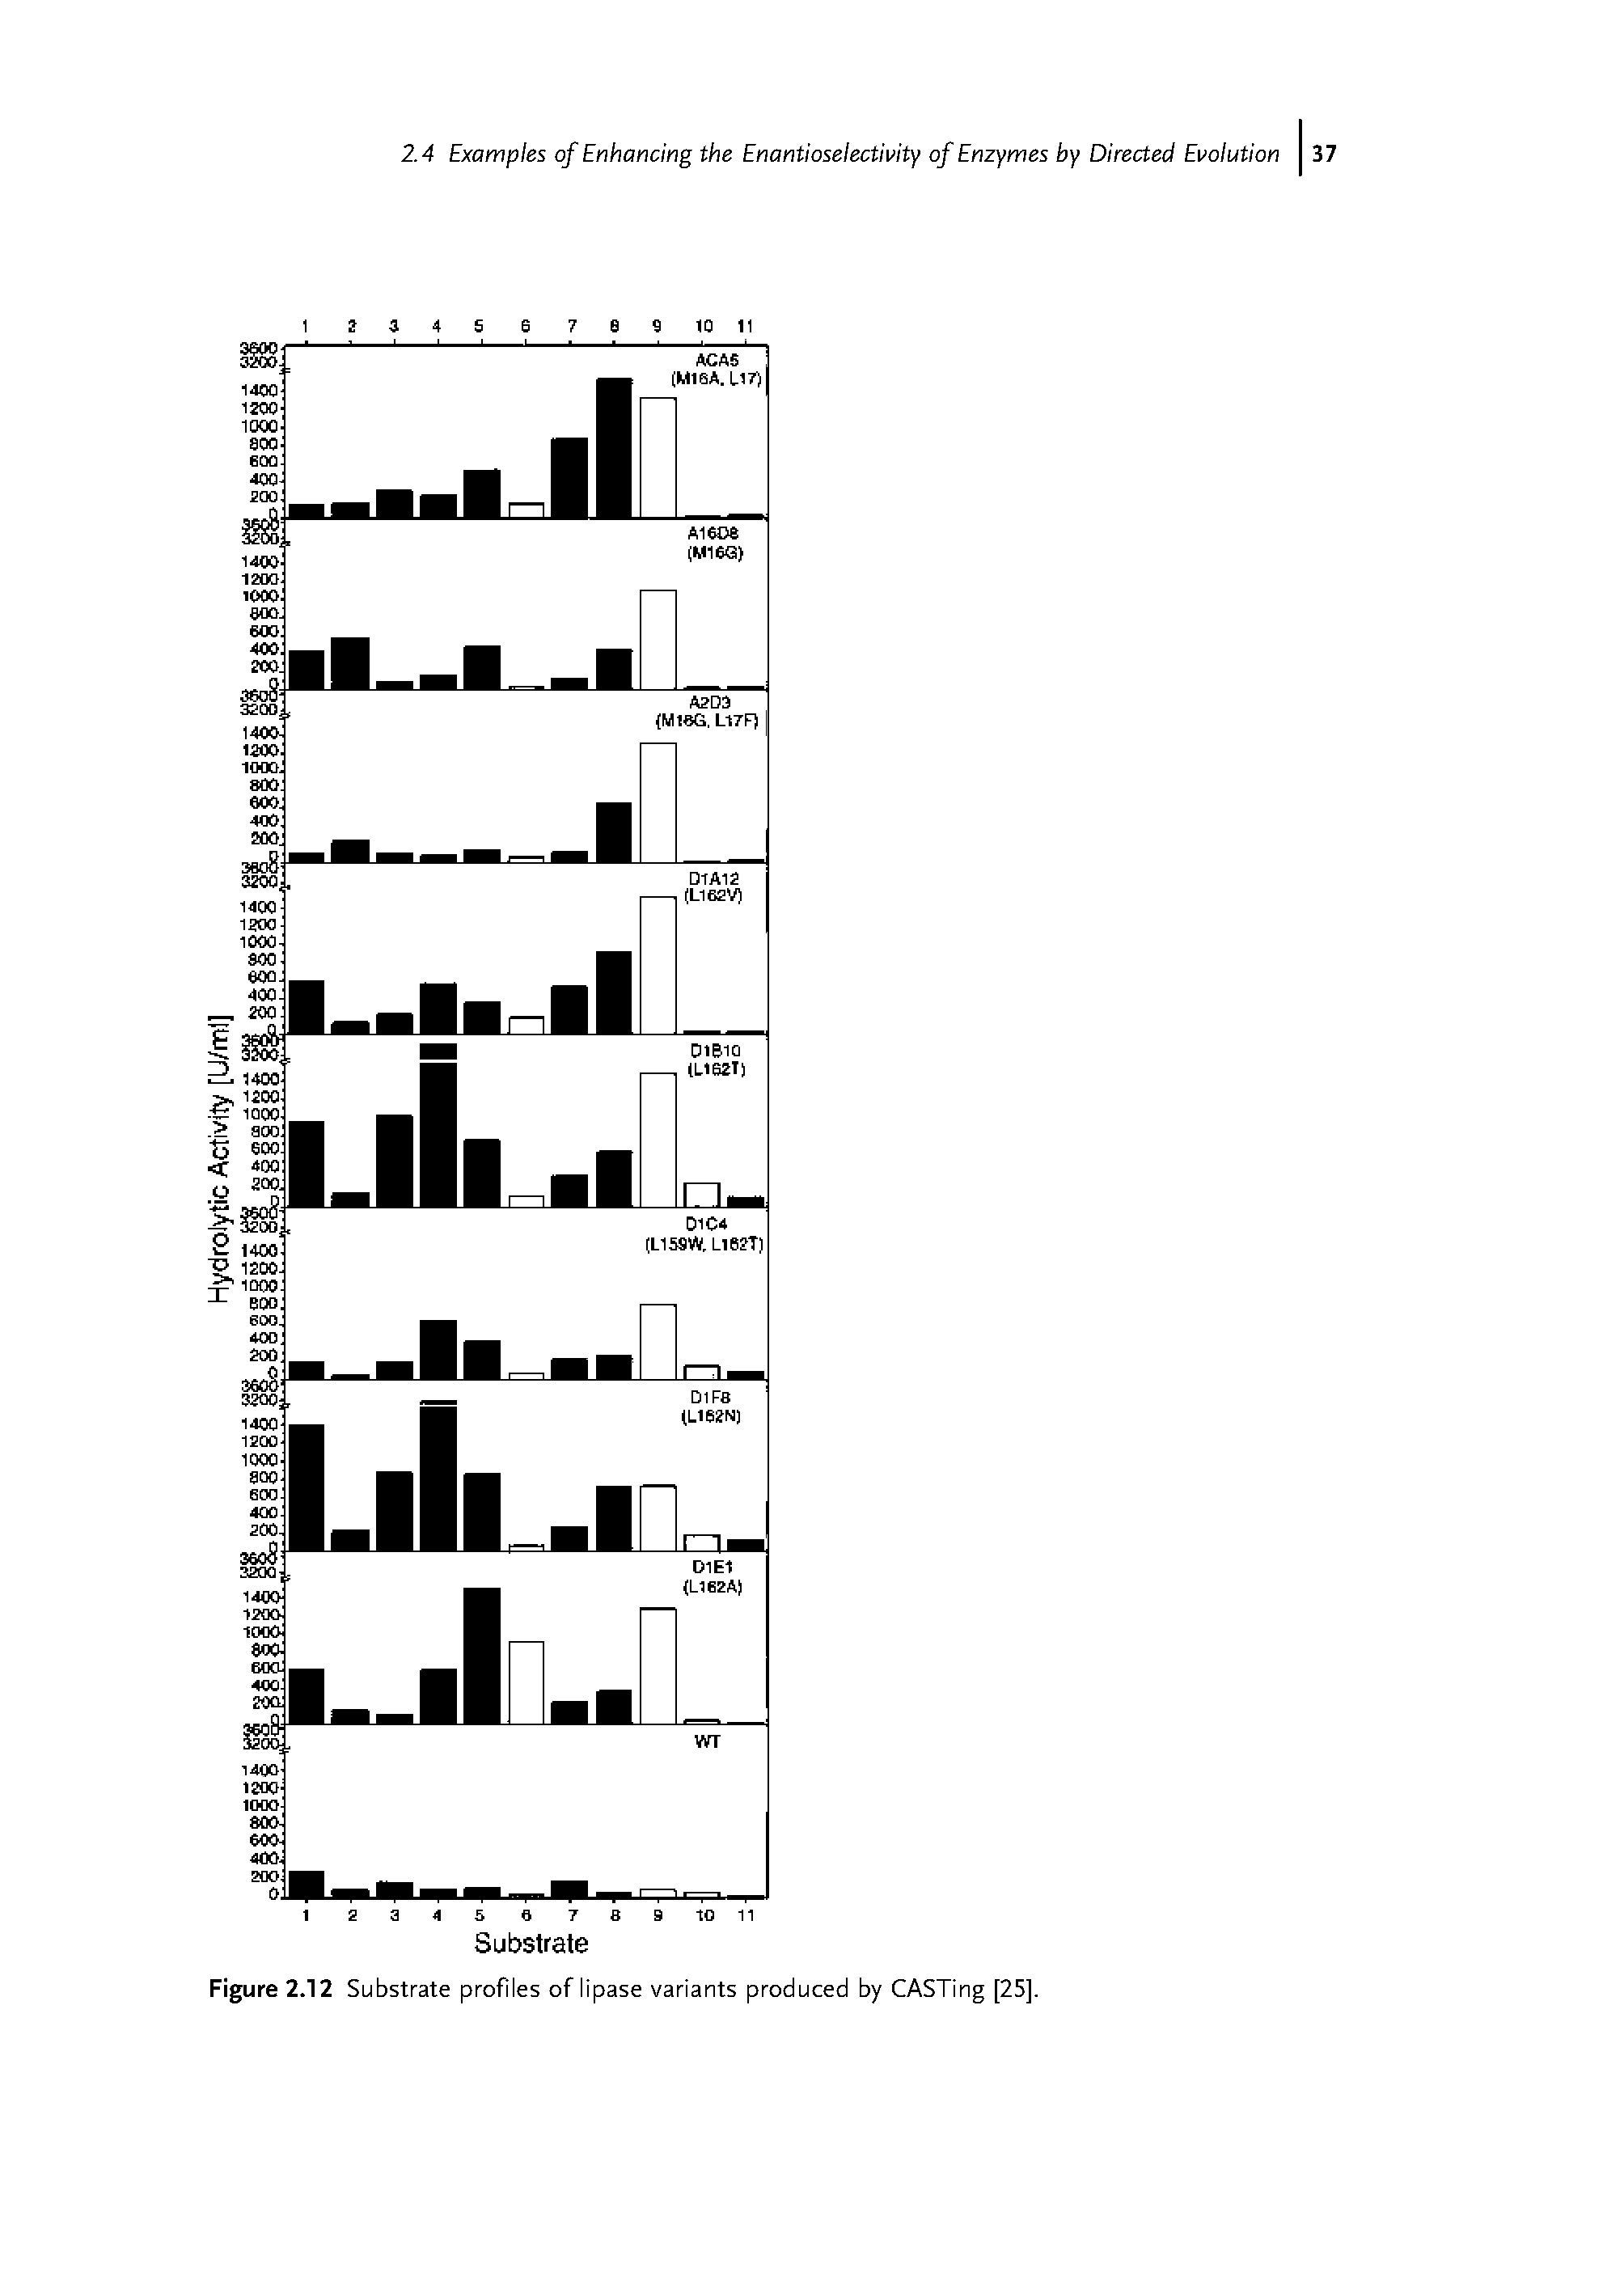 Figure 2.12 Substrate profiles of lipase variants produced by CASTing [25].